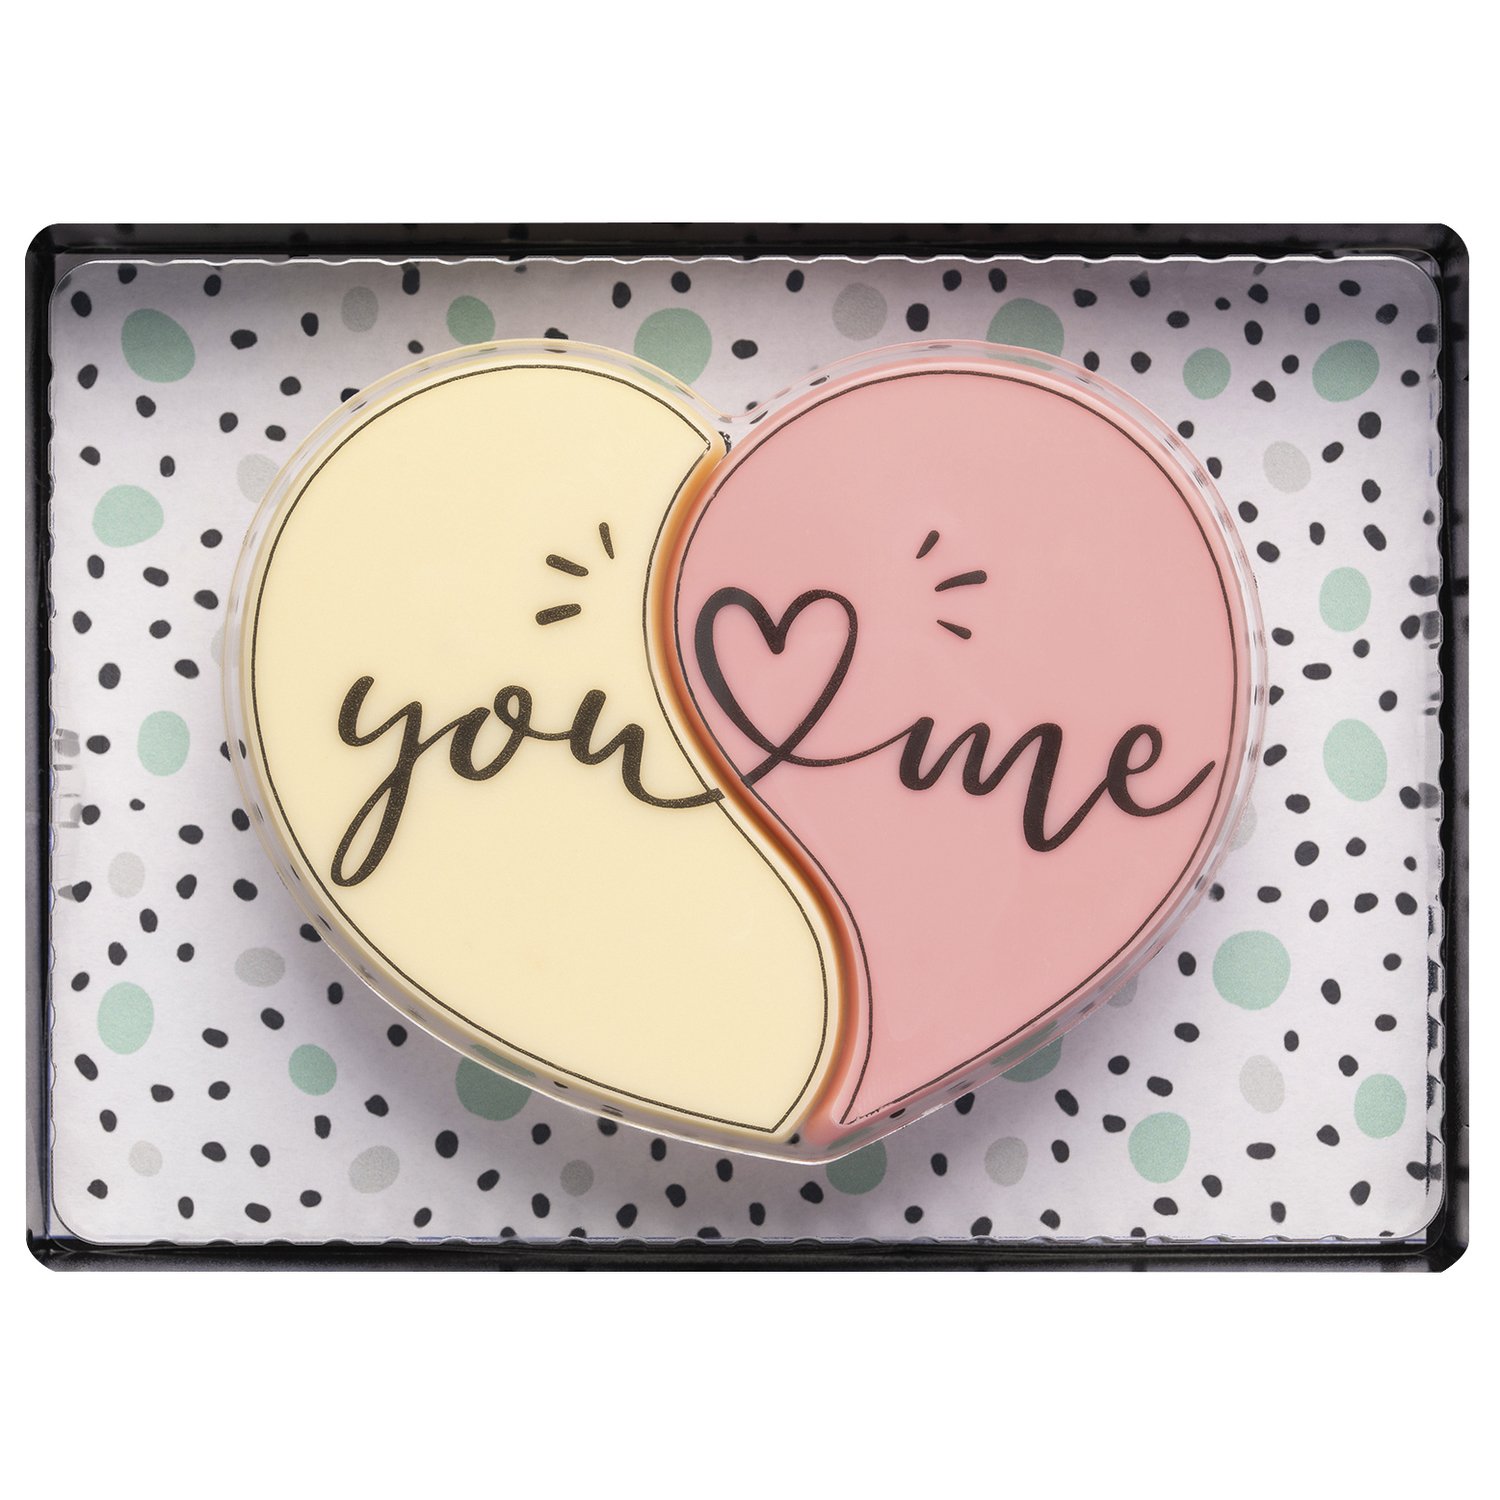 Decorated white choc separated you & me heart in gift box - 105mm - 8x50g